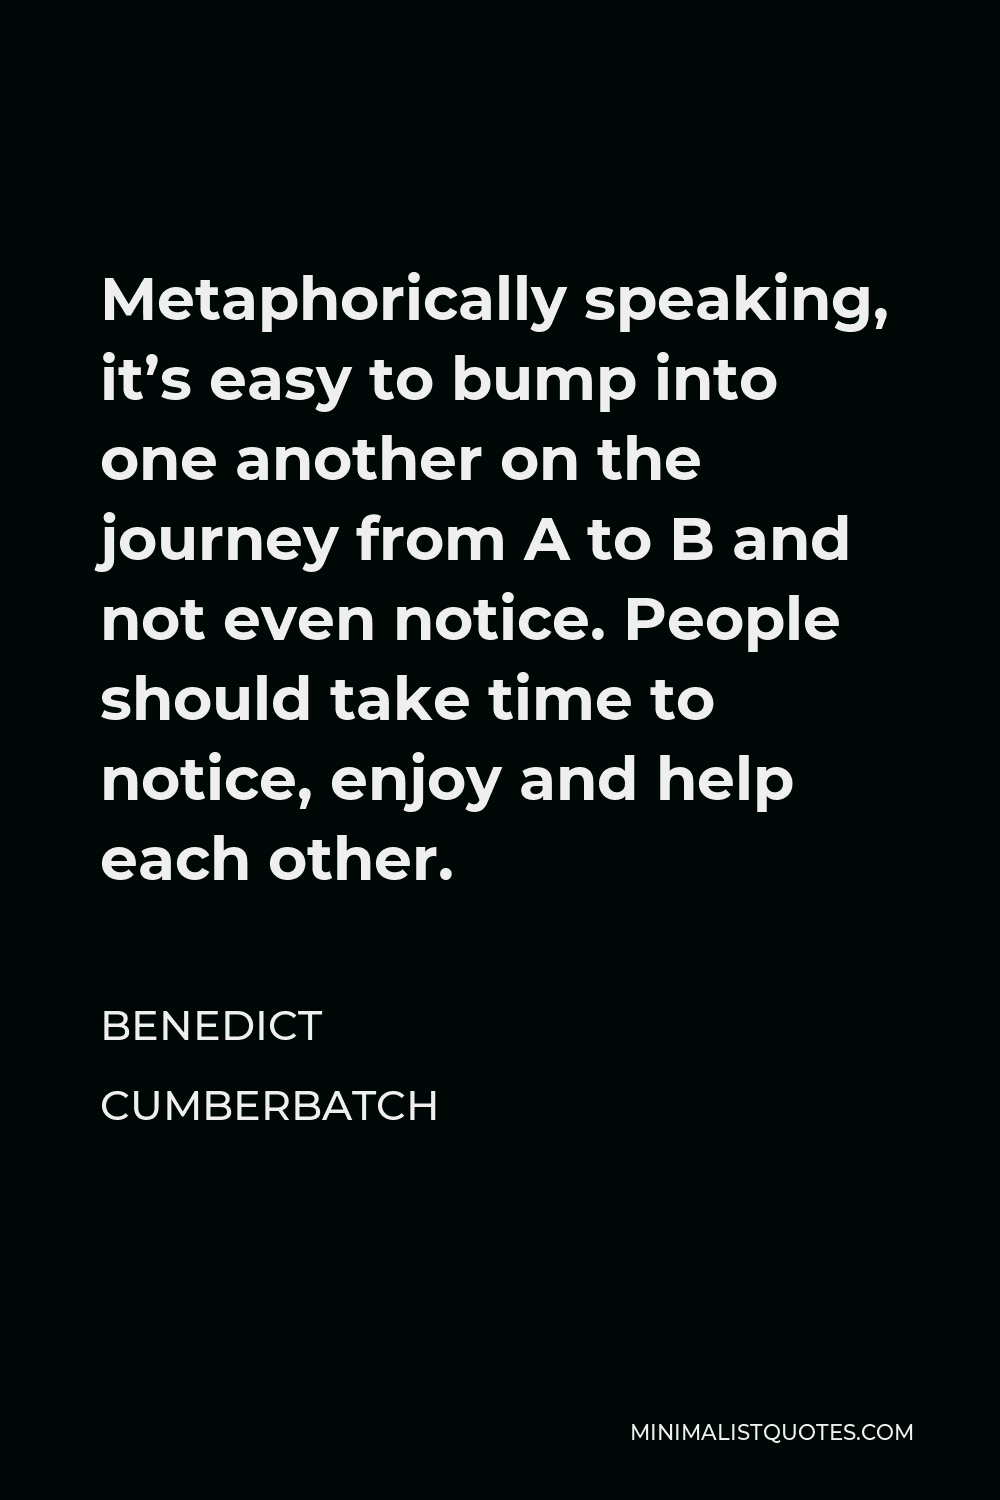 Benedict Cumberbatch Quote - Metaphorically speaking, it’s easy to bump into one another on the journey from A to B and not even notice. People should take time to notice, enjoy and help each other.